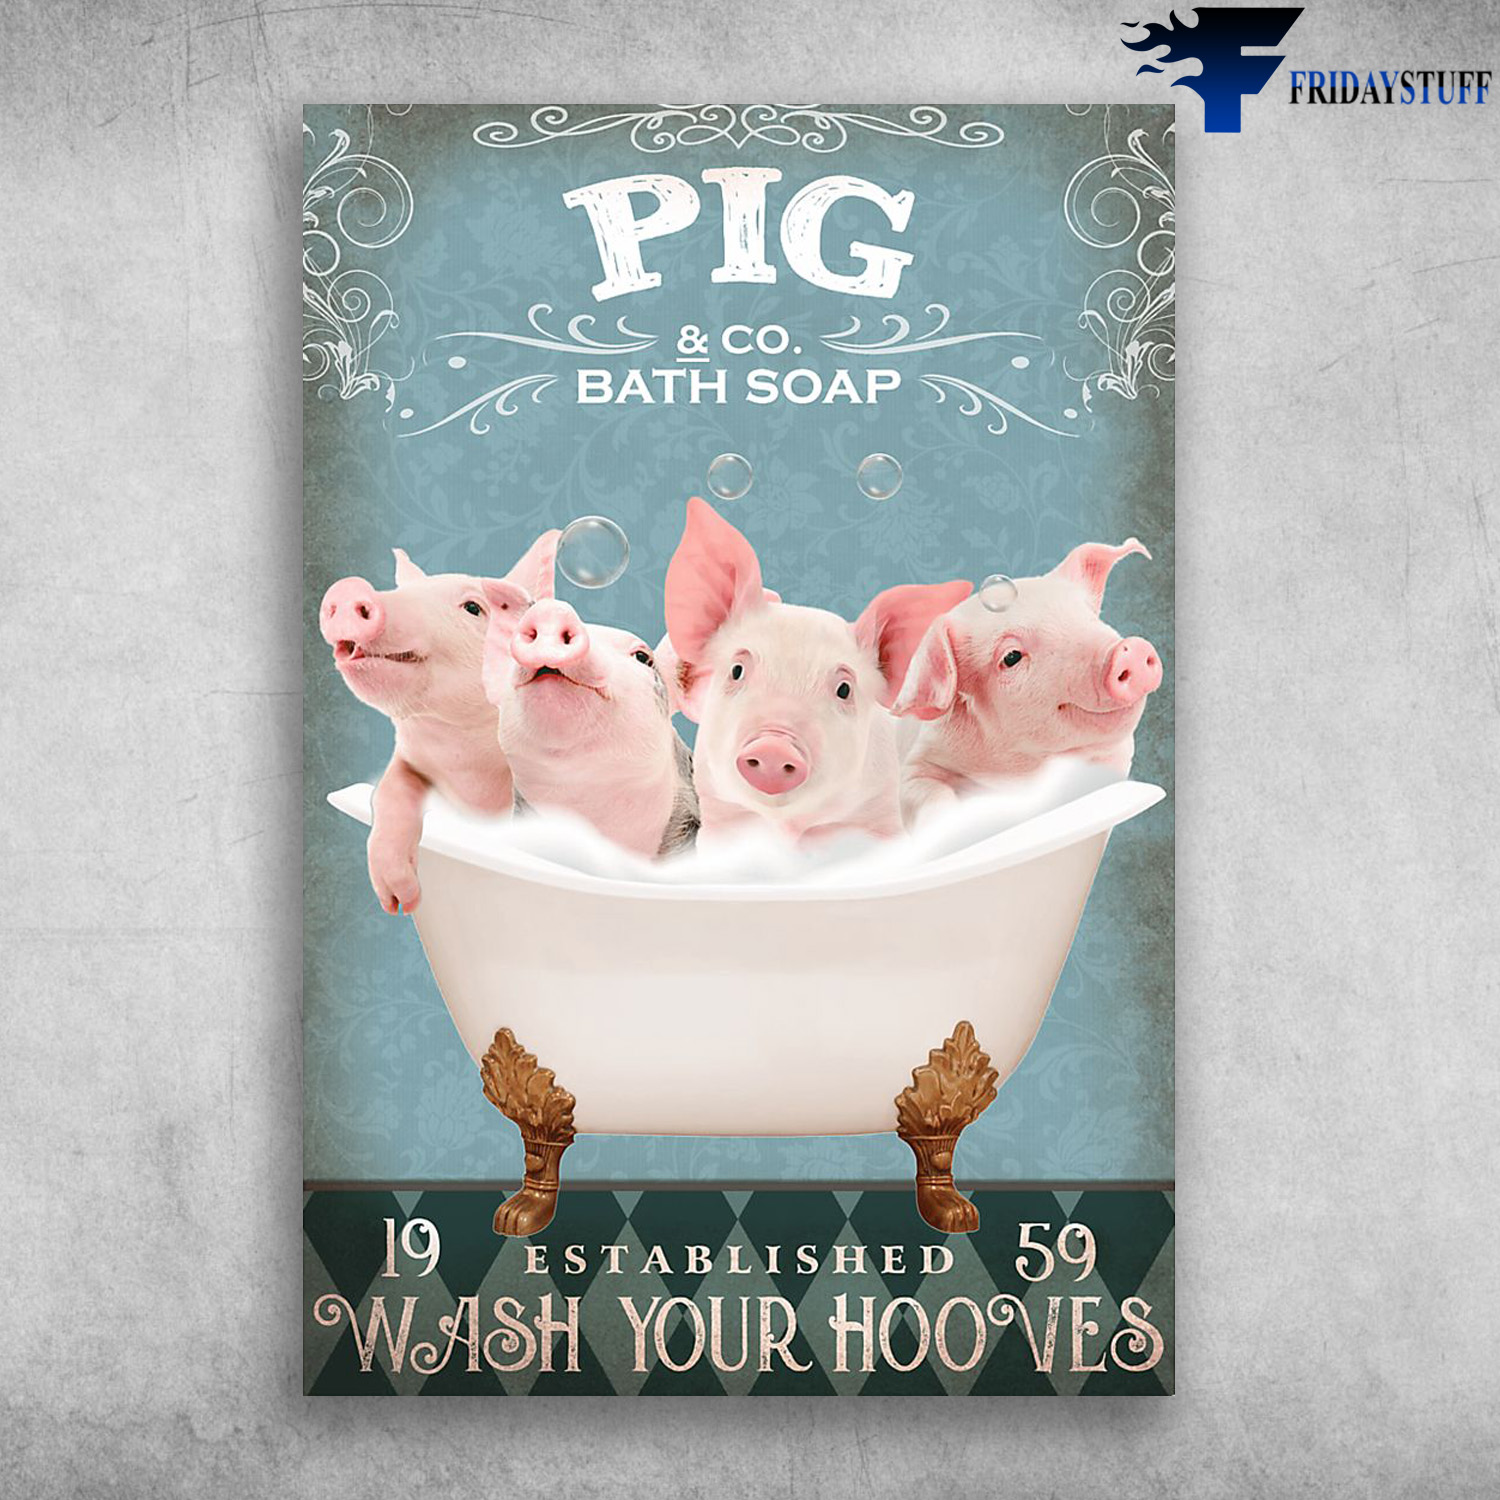 The Pigs In Bath Soap - Pig CO. Bathsoap, 19 Established 59, Wash Your Hooves